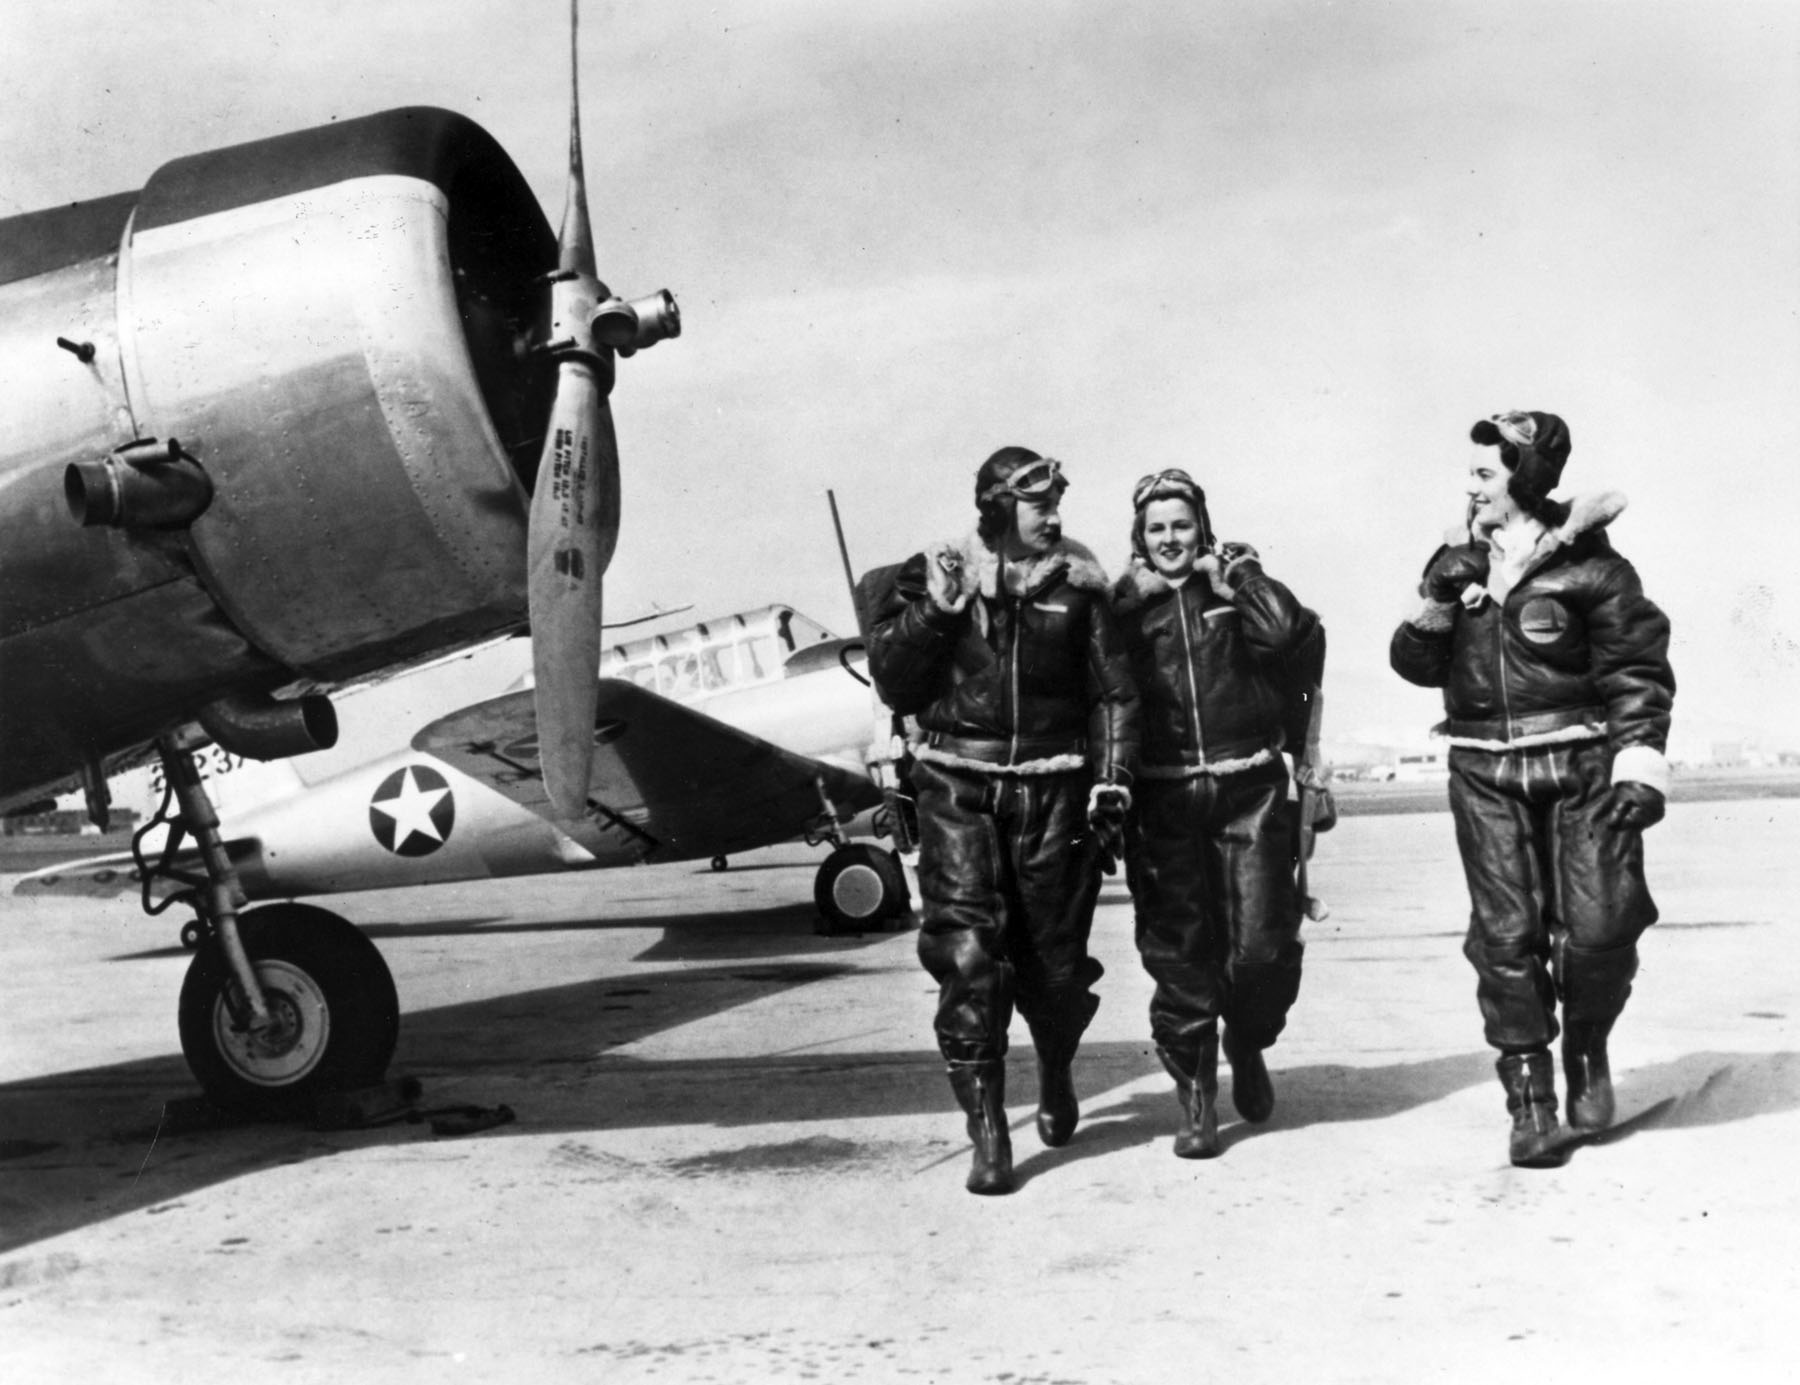 Three women wearing World War Two era pilot gear walk on a tarmac, with two parked planes on the right.